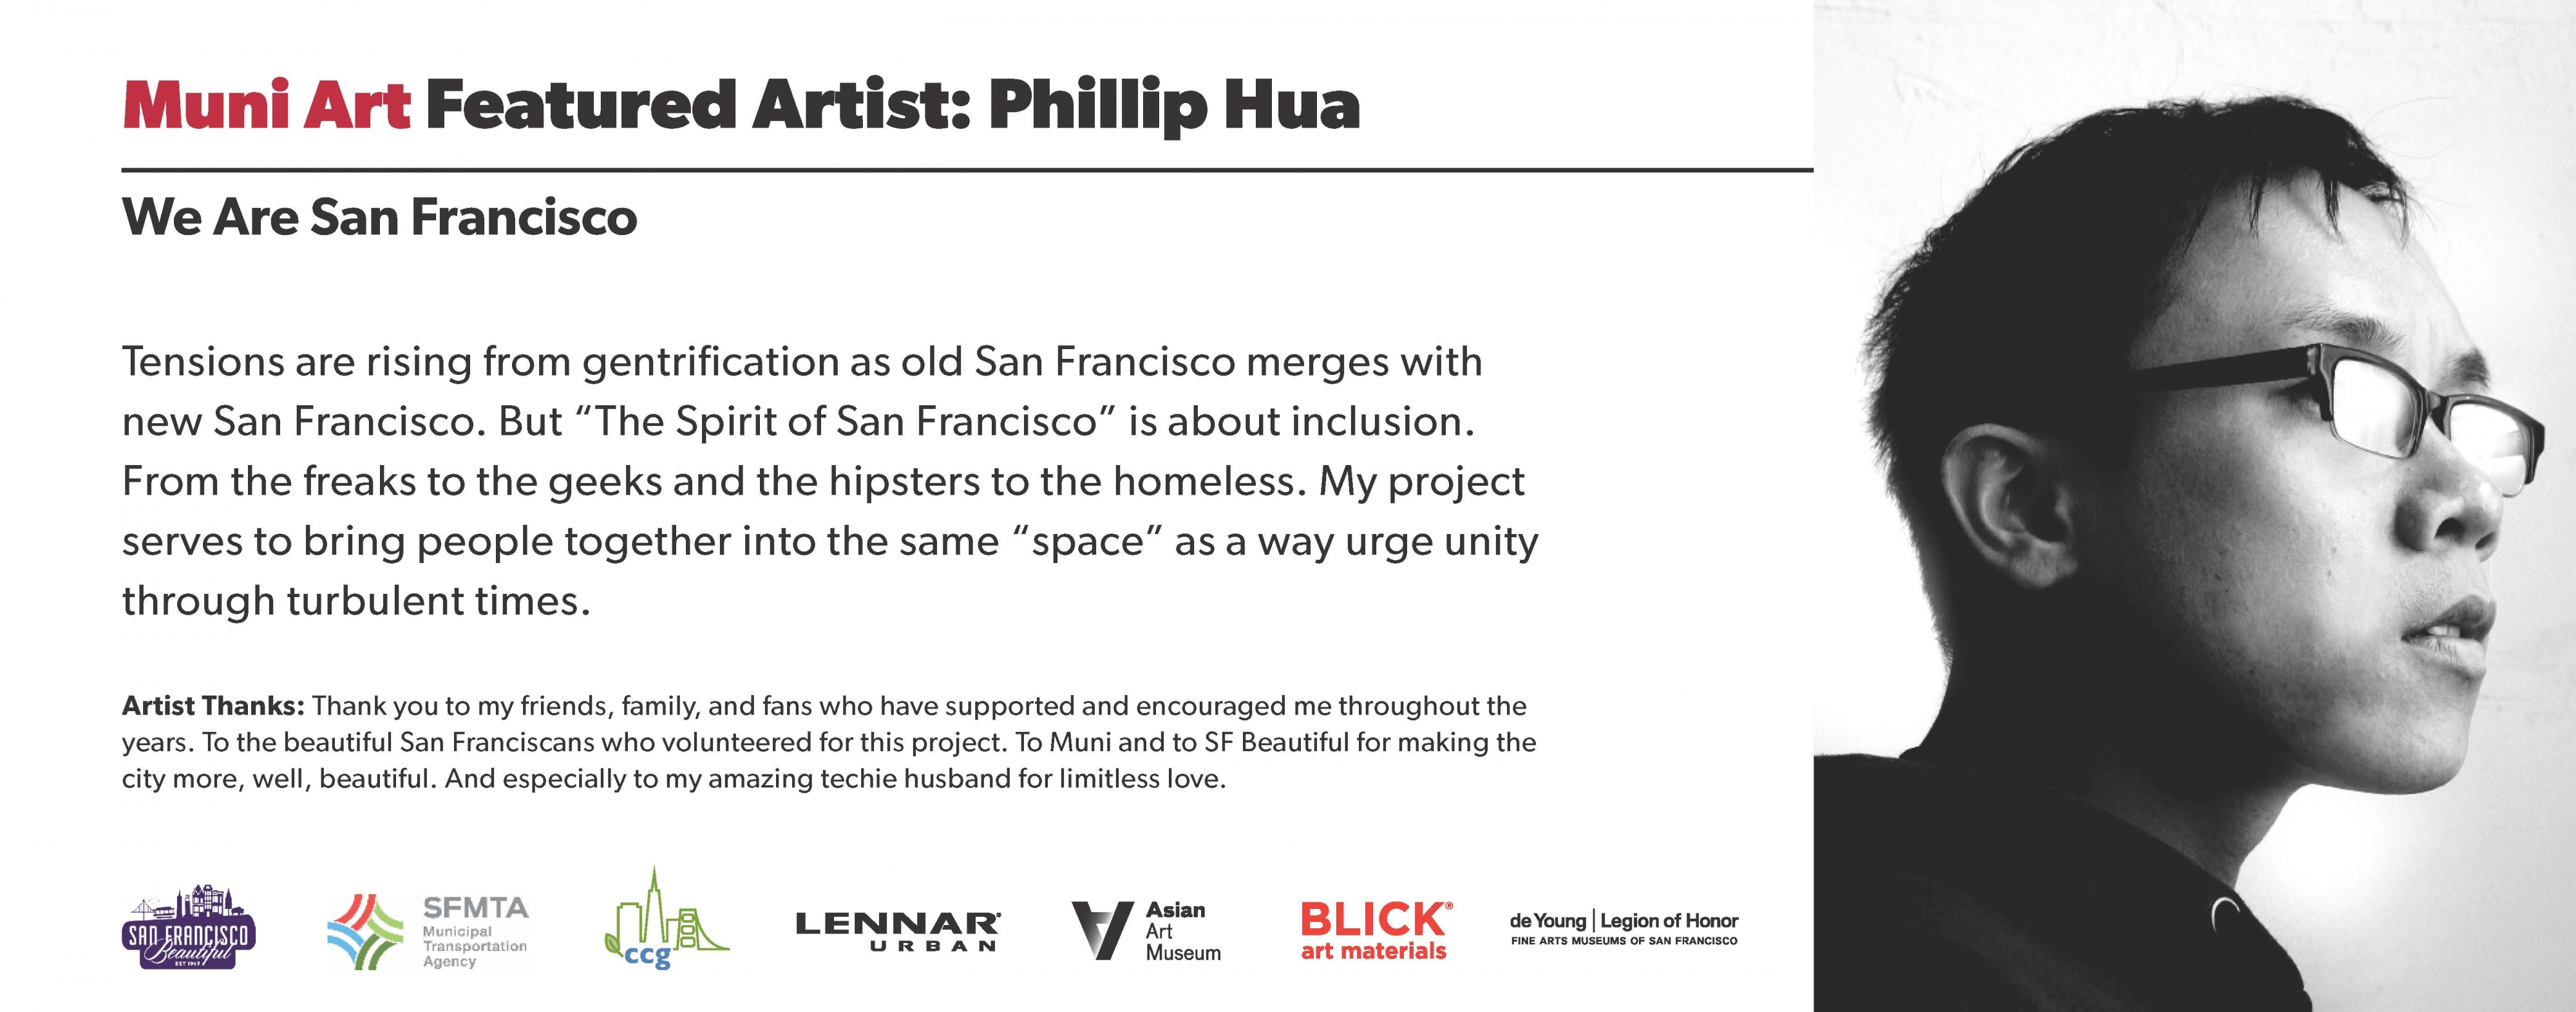  Phillip Hua, We Are San Francisco" followed by a description of the exhibit and the artist's acknowledgements. Below are the sponsor logos with a photograph of the artist, a young man with short cropped dark hair and glasses